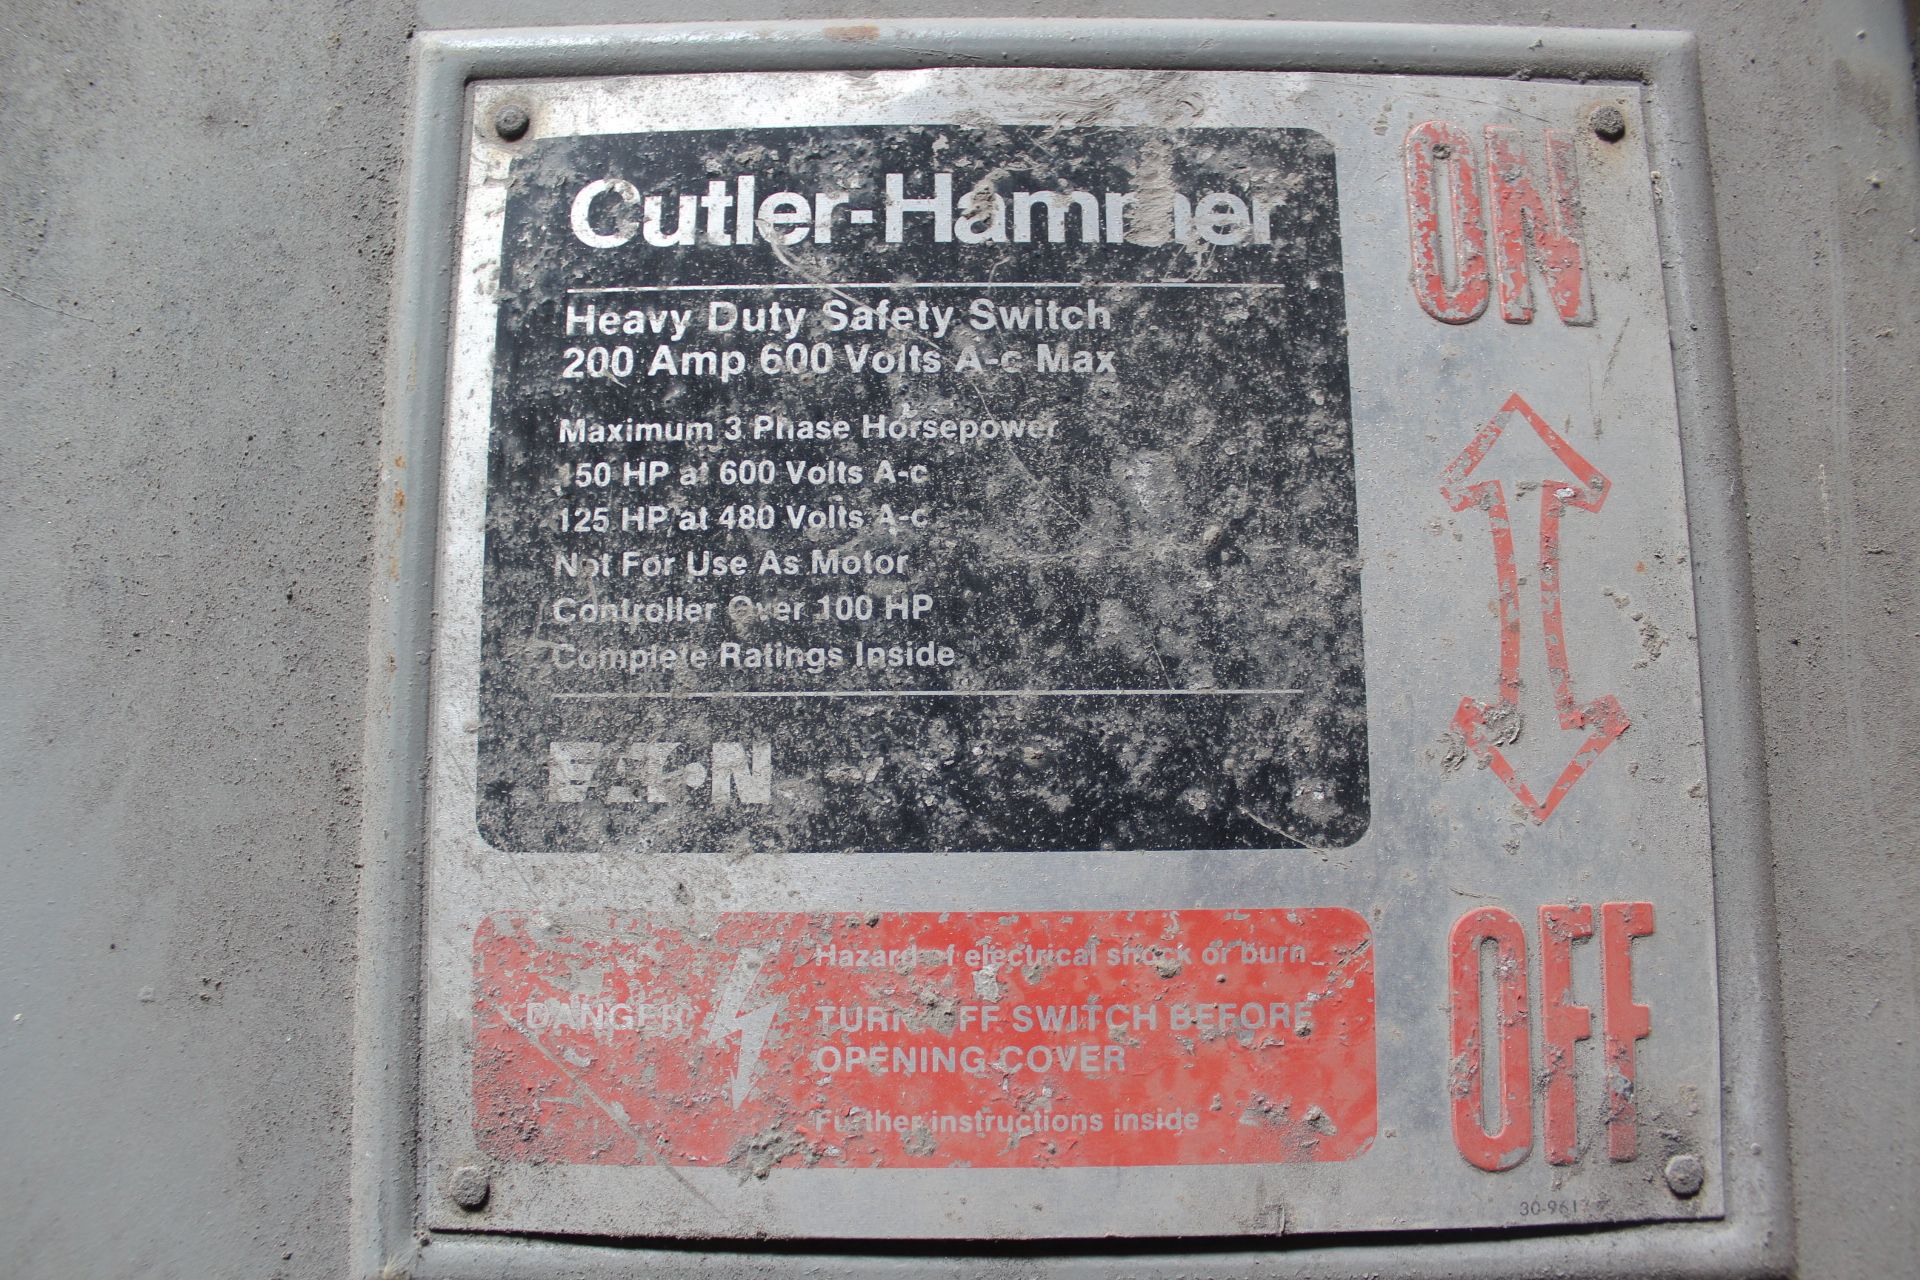 Cutler-Hammer Heavy Duty Safety Switch, 200 Amp, 600 Volts A-C Max - Image 3 of 4